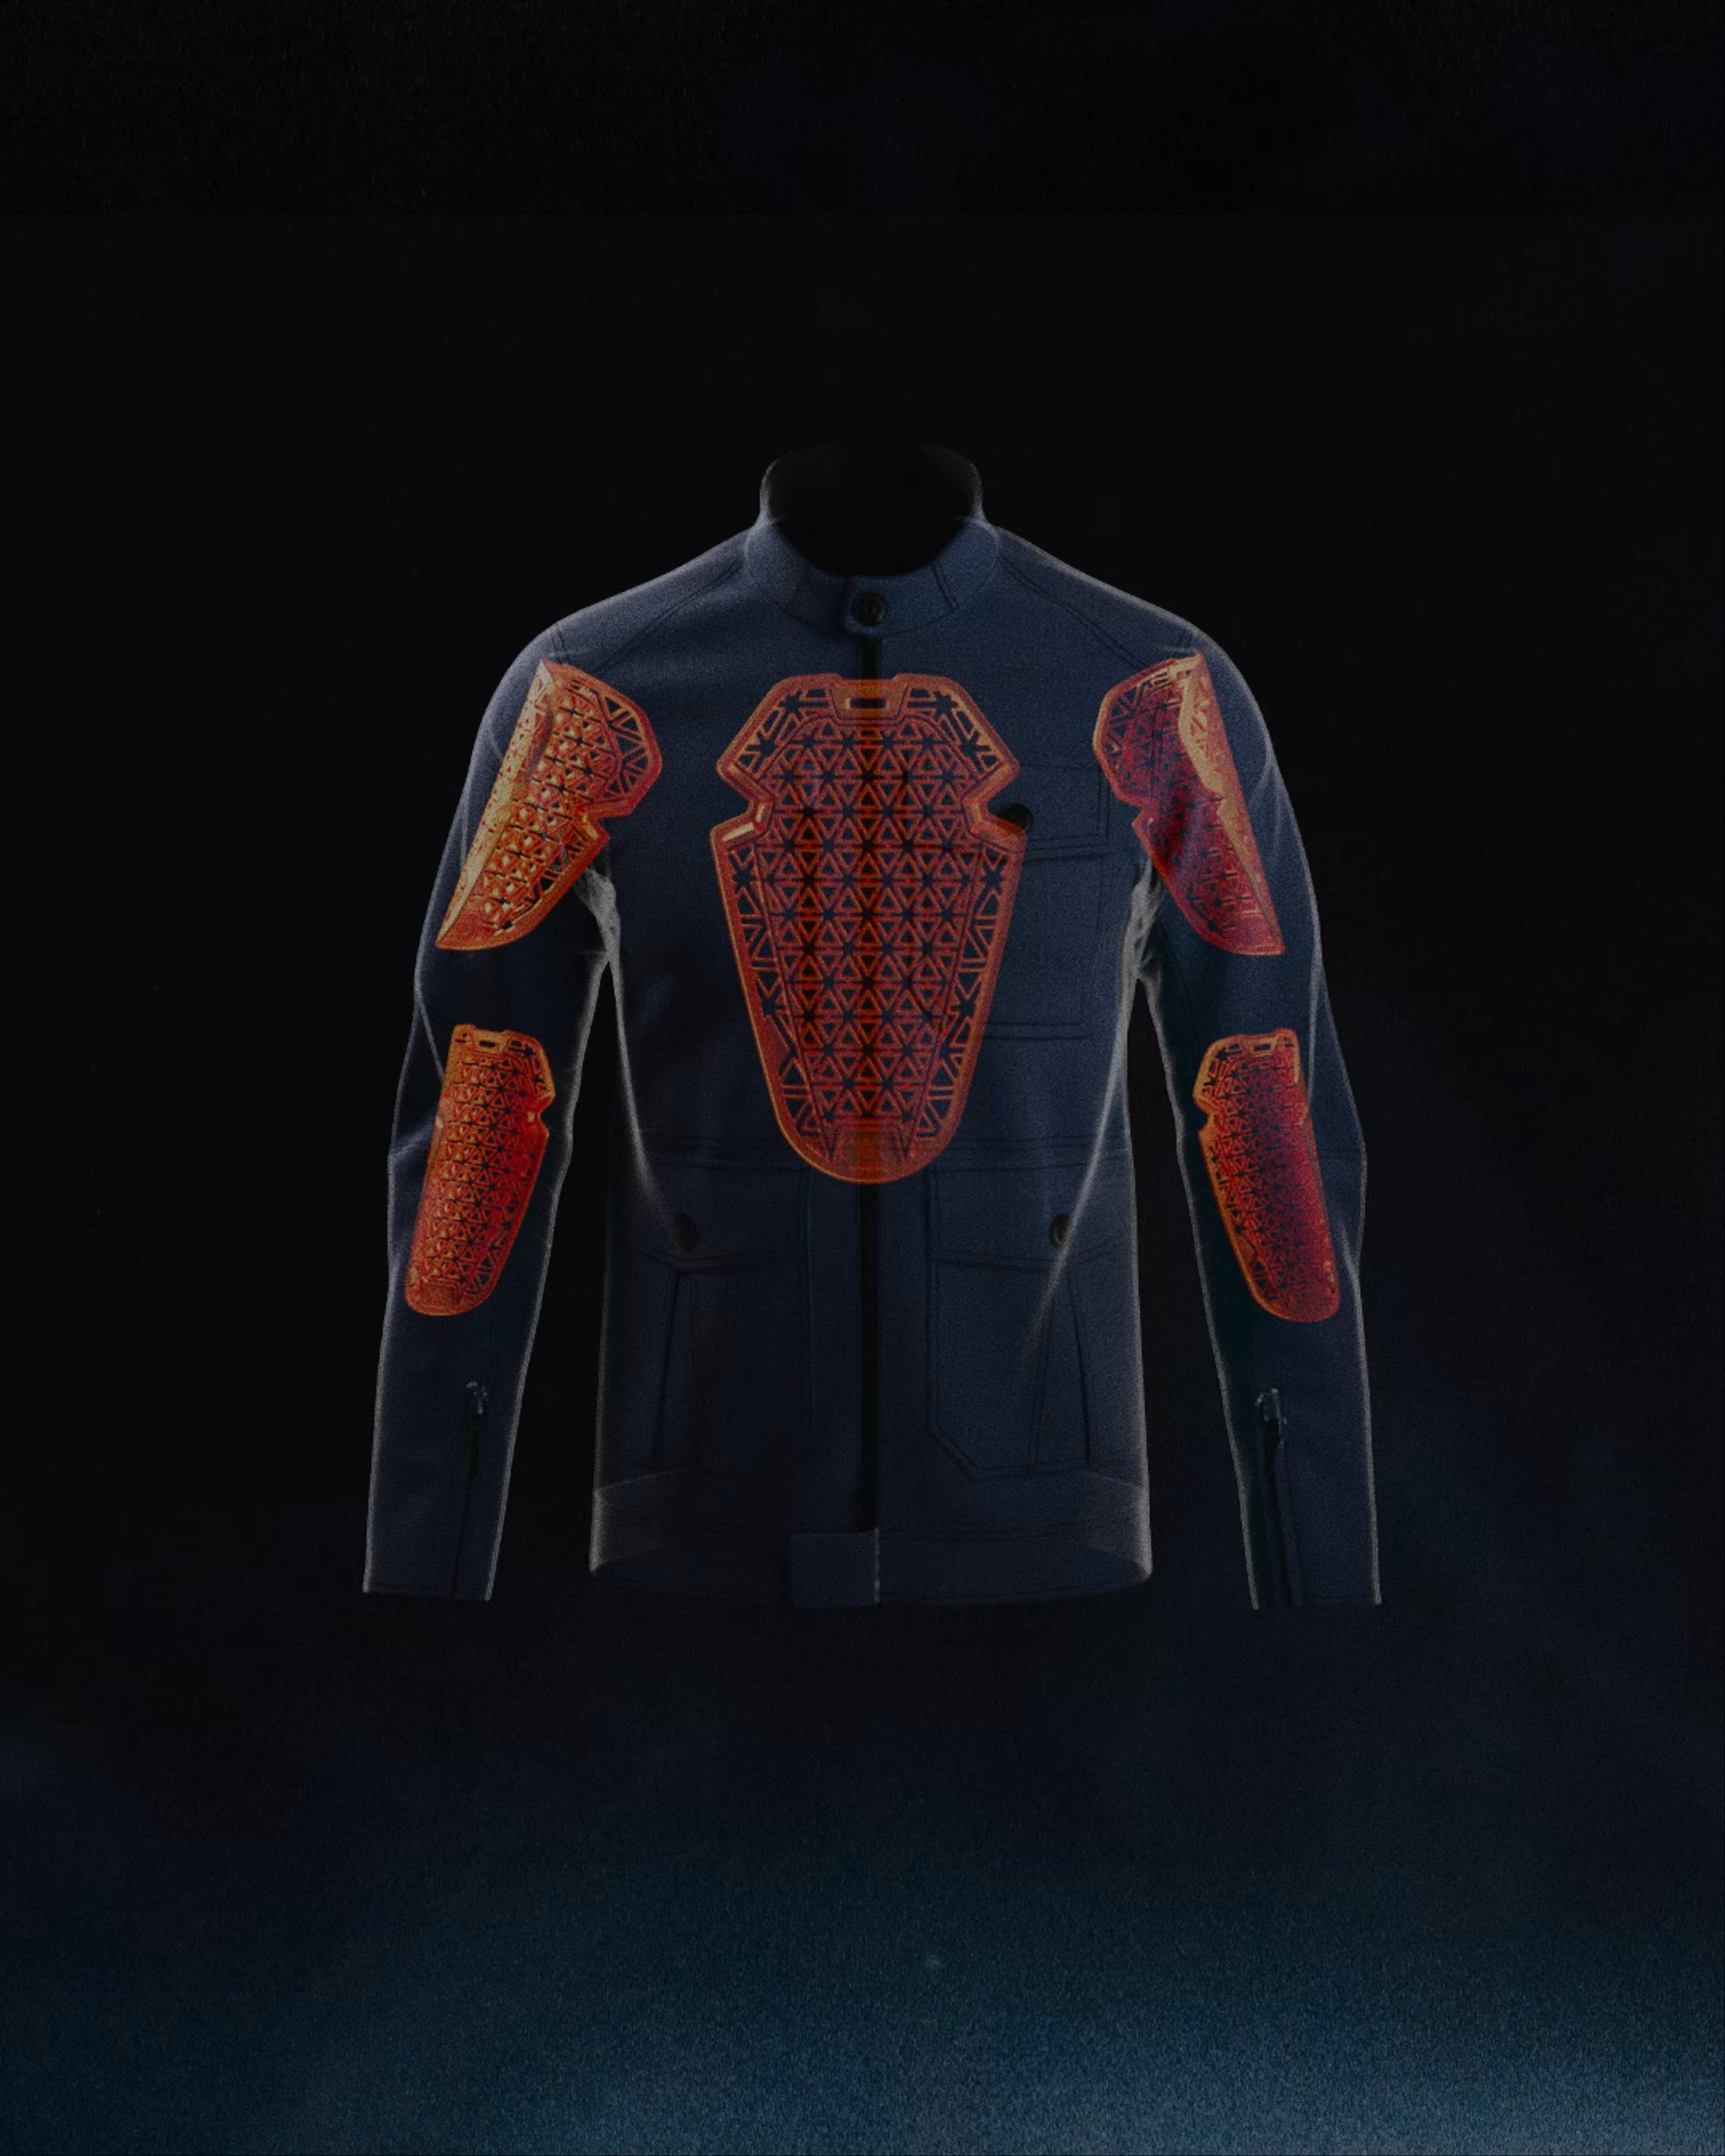 360º view of Mulholland Motorcycle Jacket